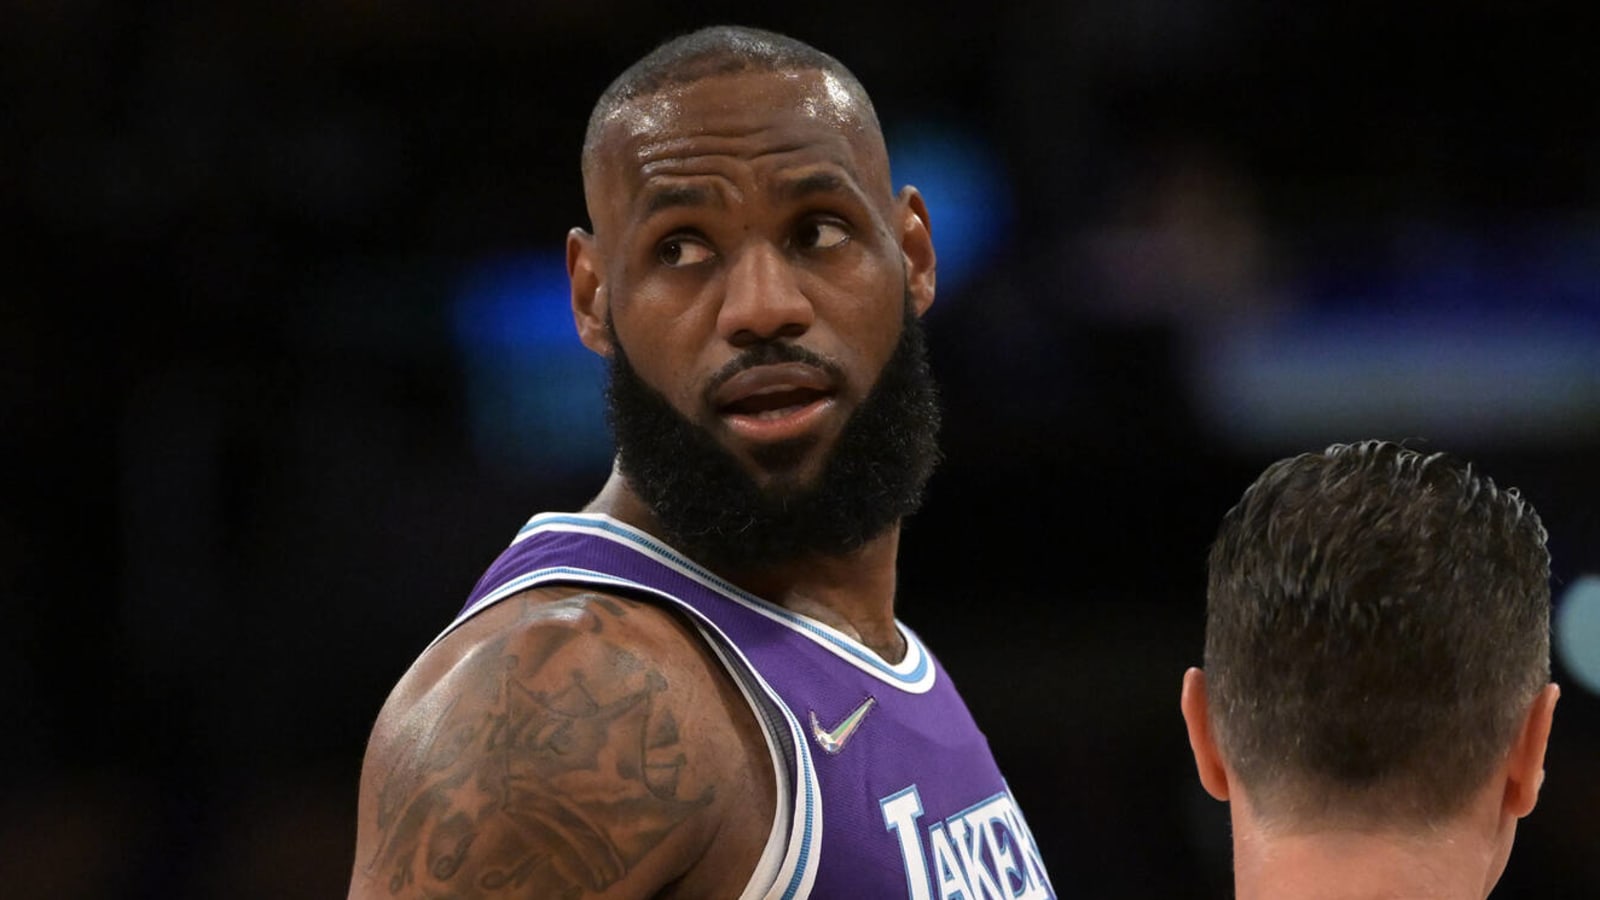 LeBron James hints at wanting to team up with Luka Doncic